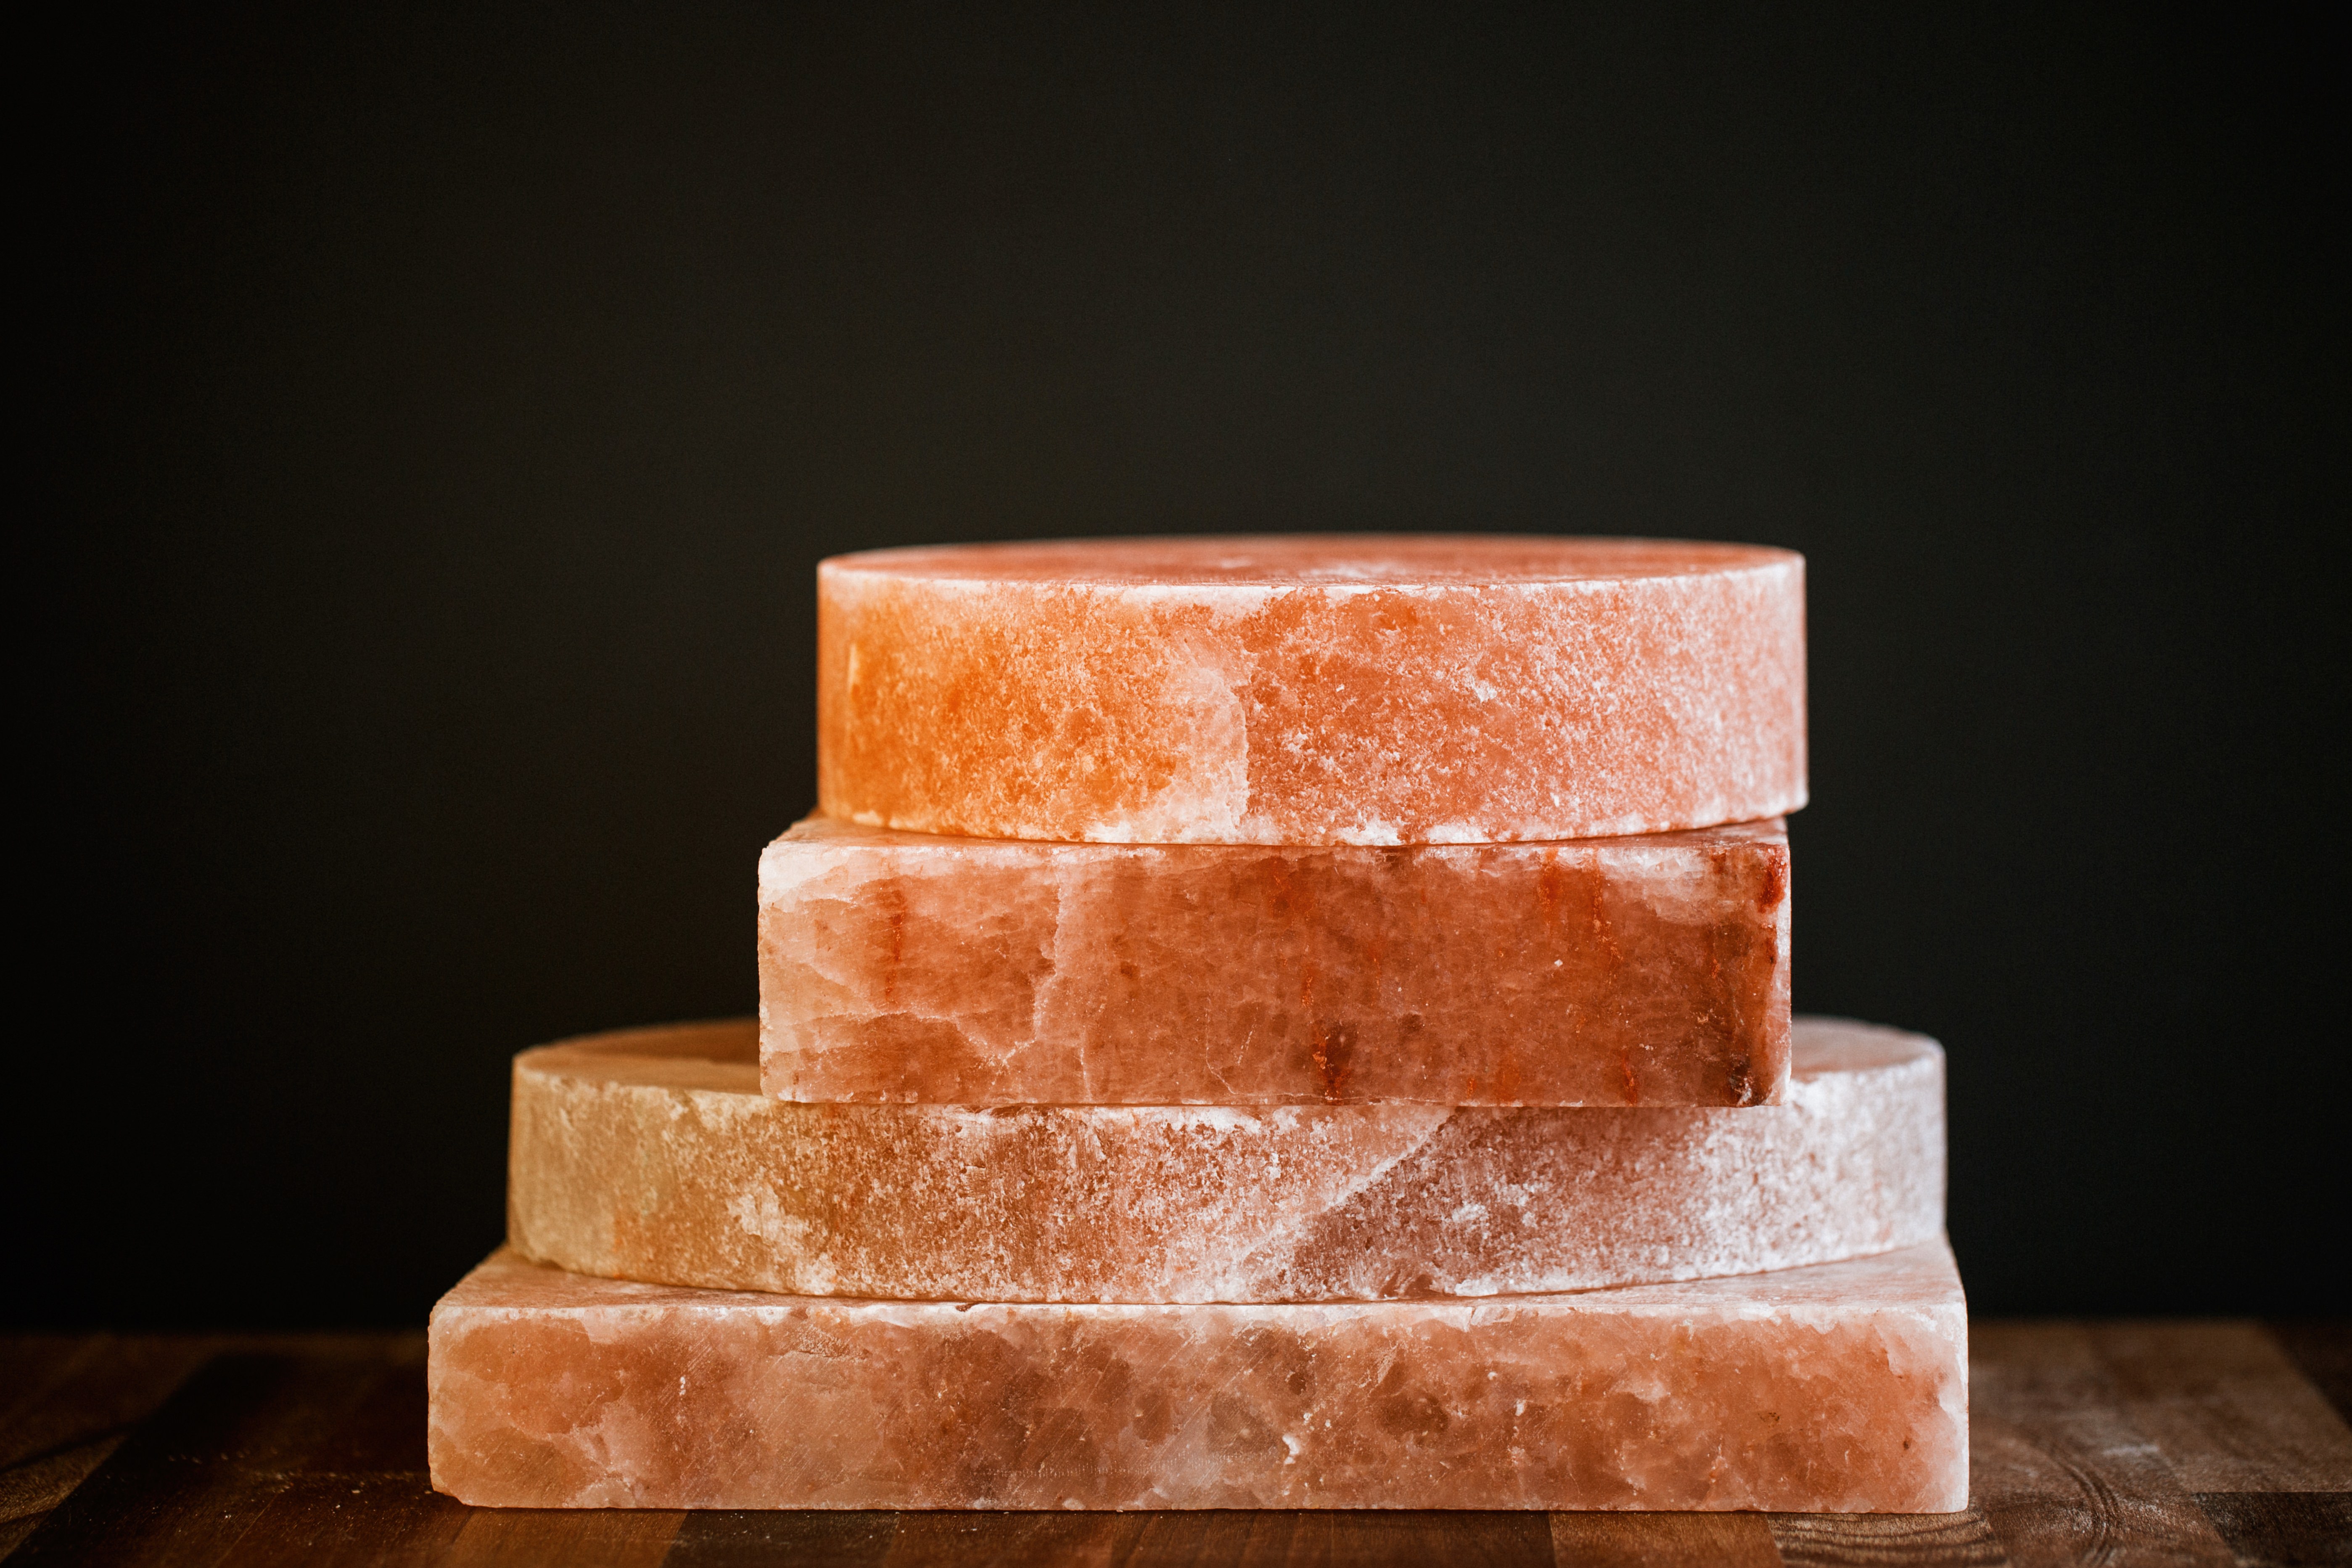 Where Does Himalayan Salt Come From?